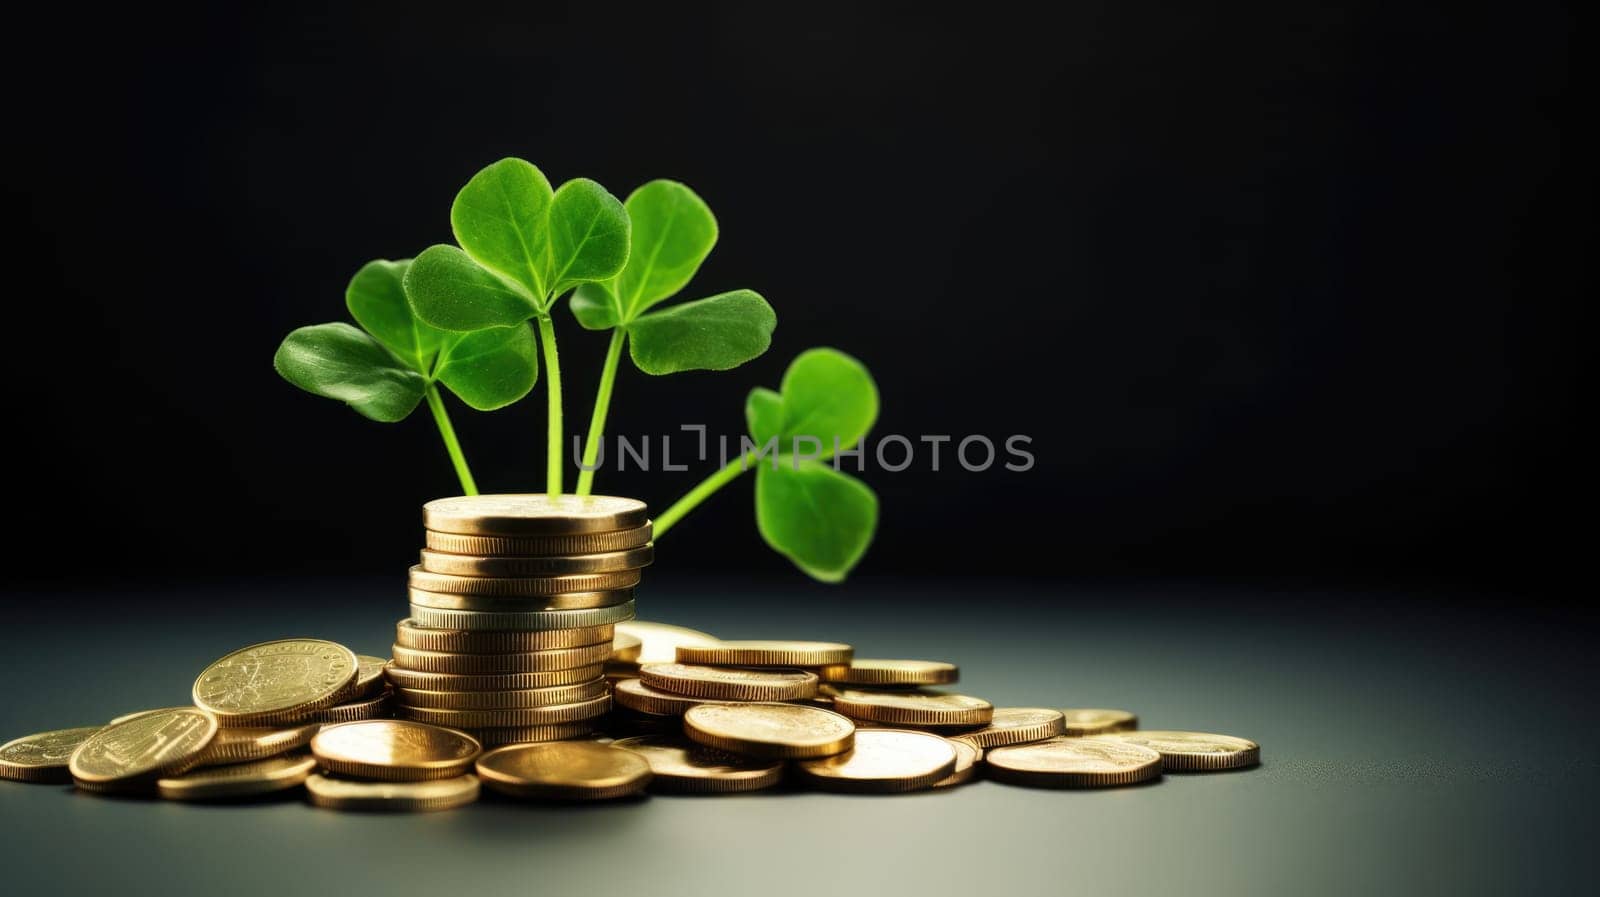 Green clover leaves are growing on stack of gold coins on black background symbolizing luck and prosperity. St Patricks Day by JuliaDorian